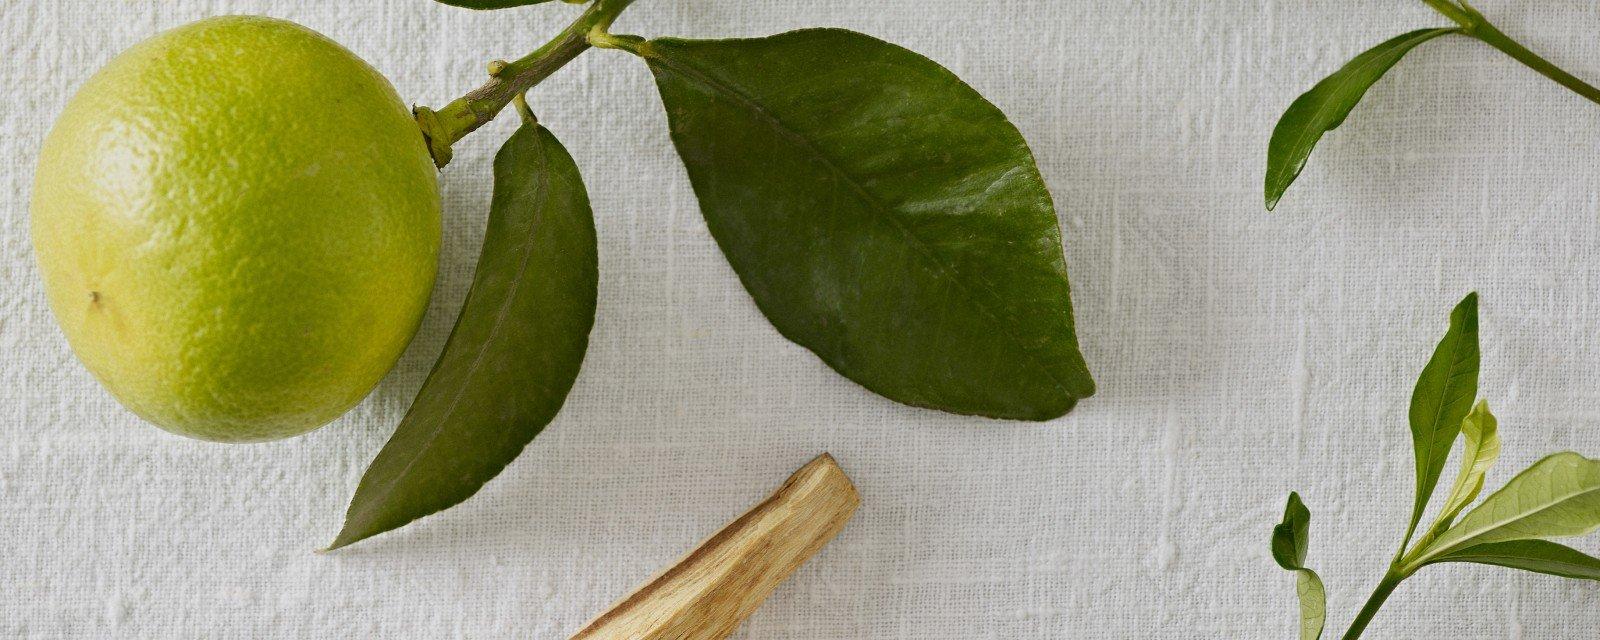 a green leaf and a wooden spoon on a white table